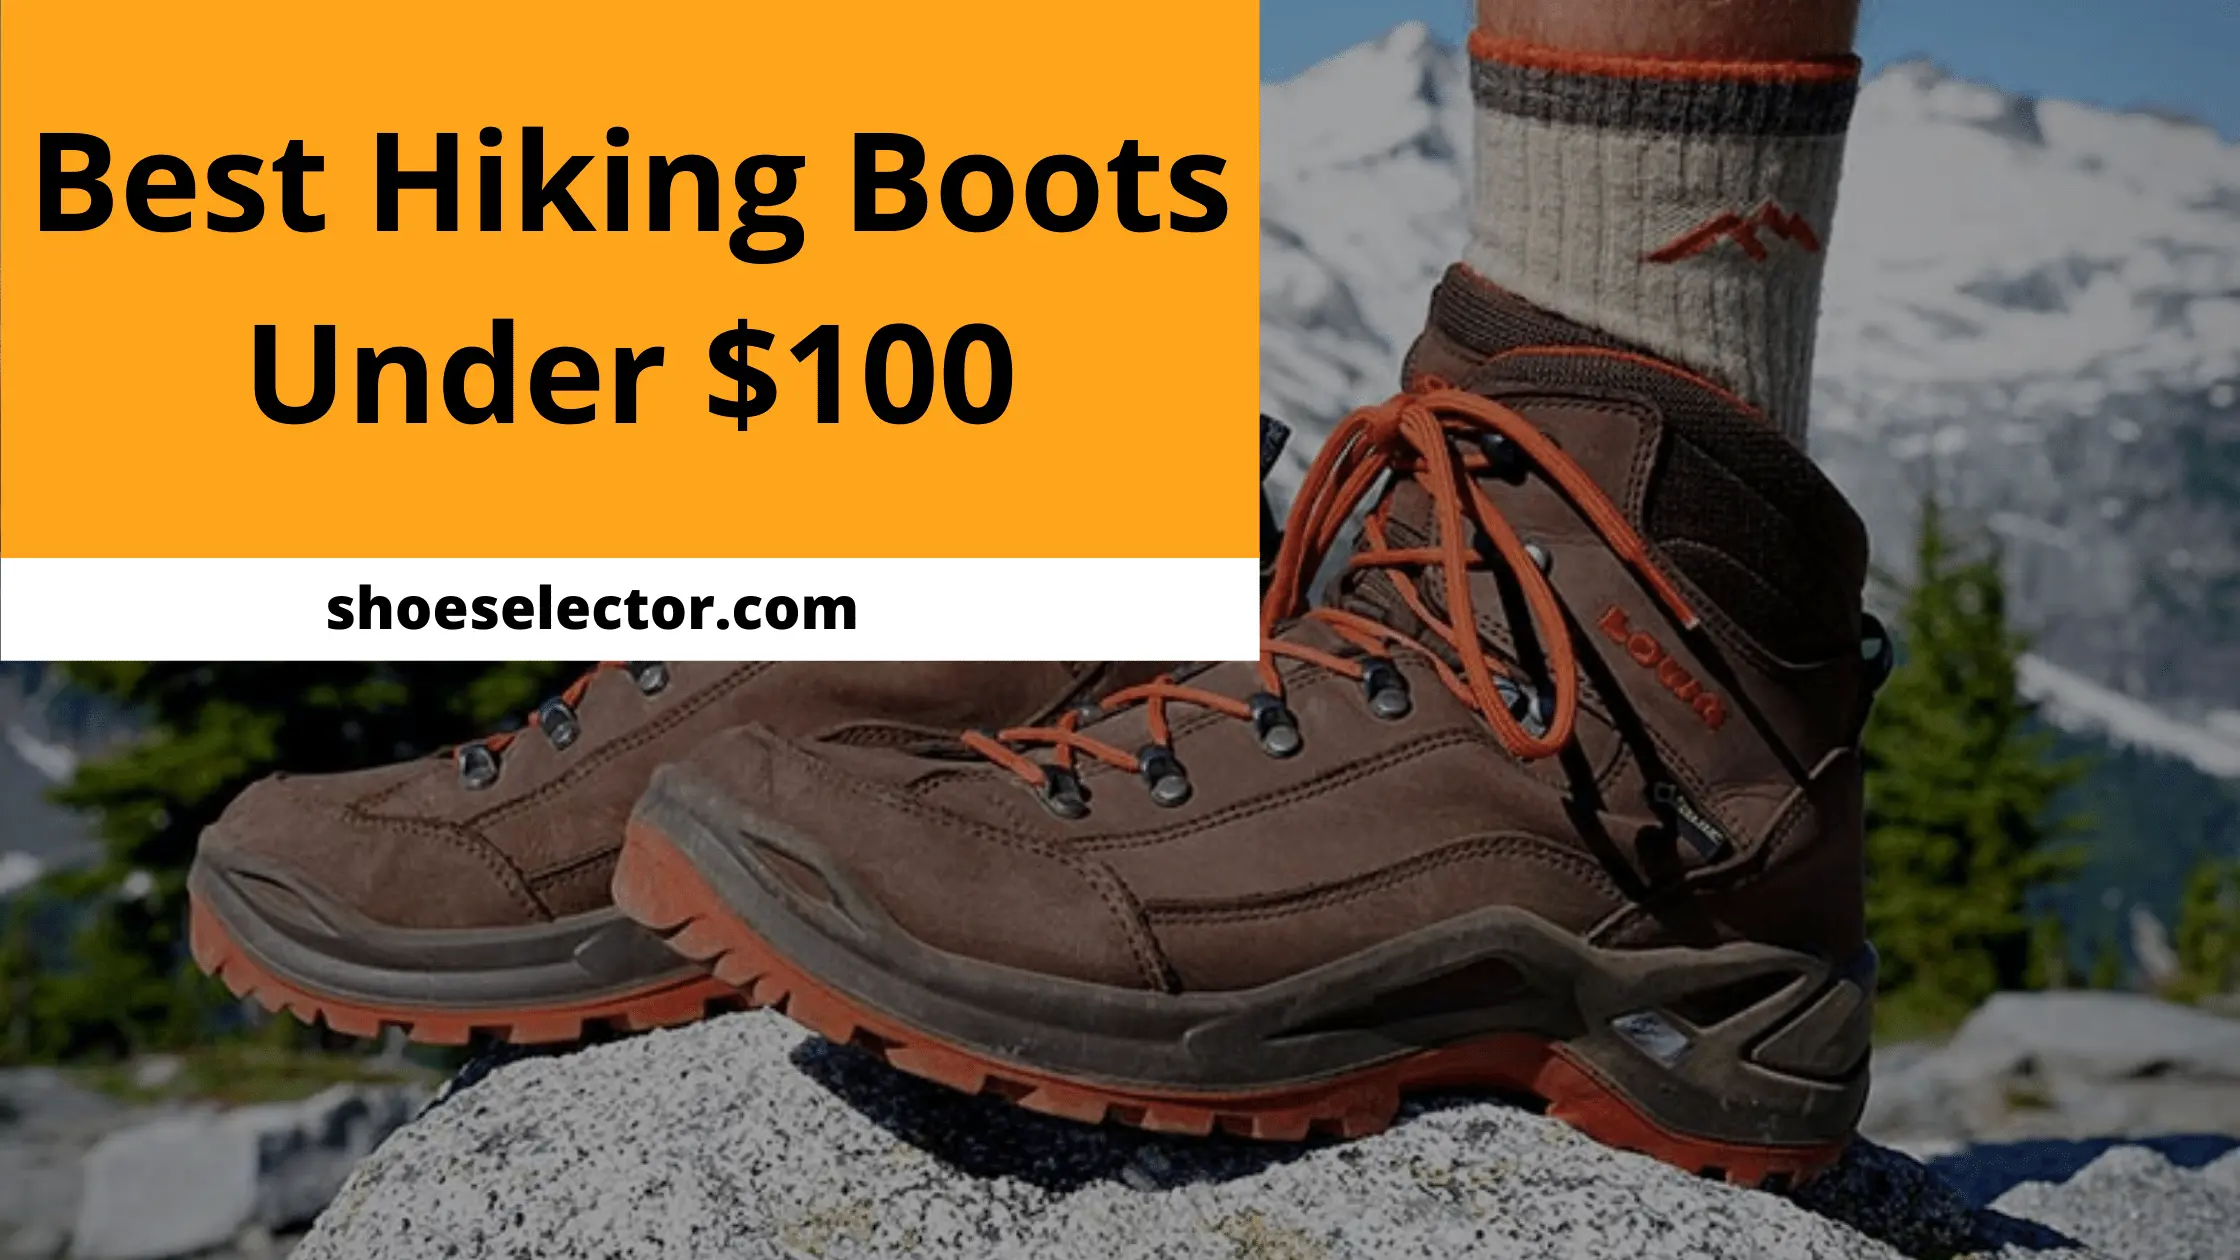 Best Hiking Boots Under $100 - Supportive And Stylish